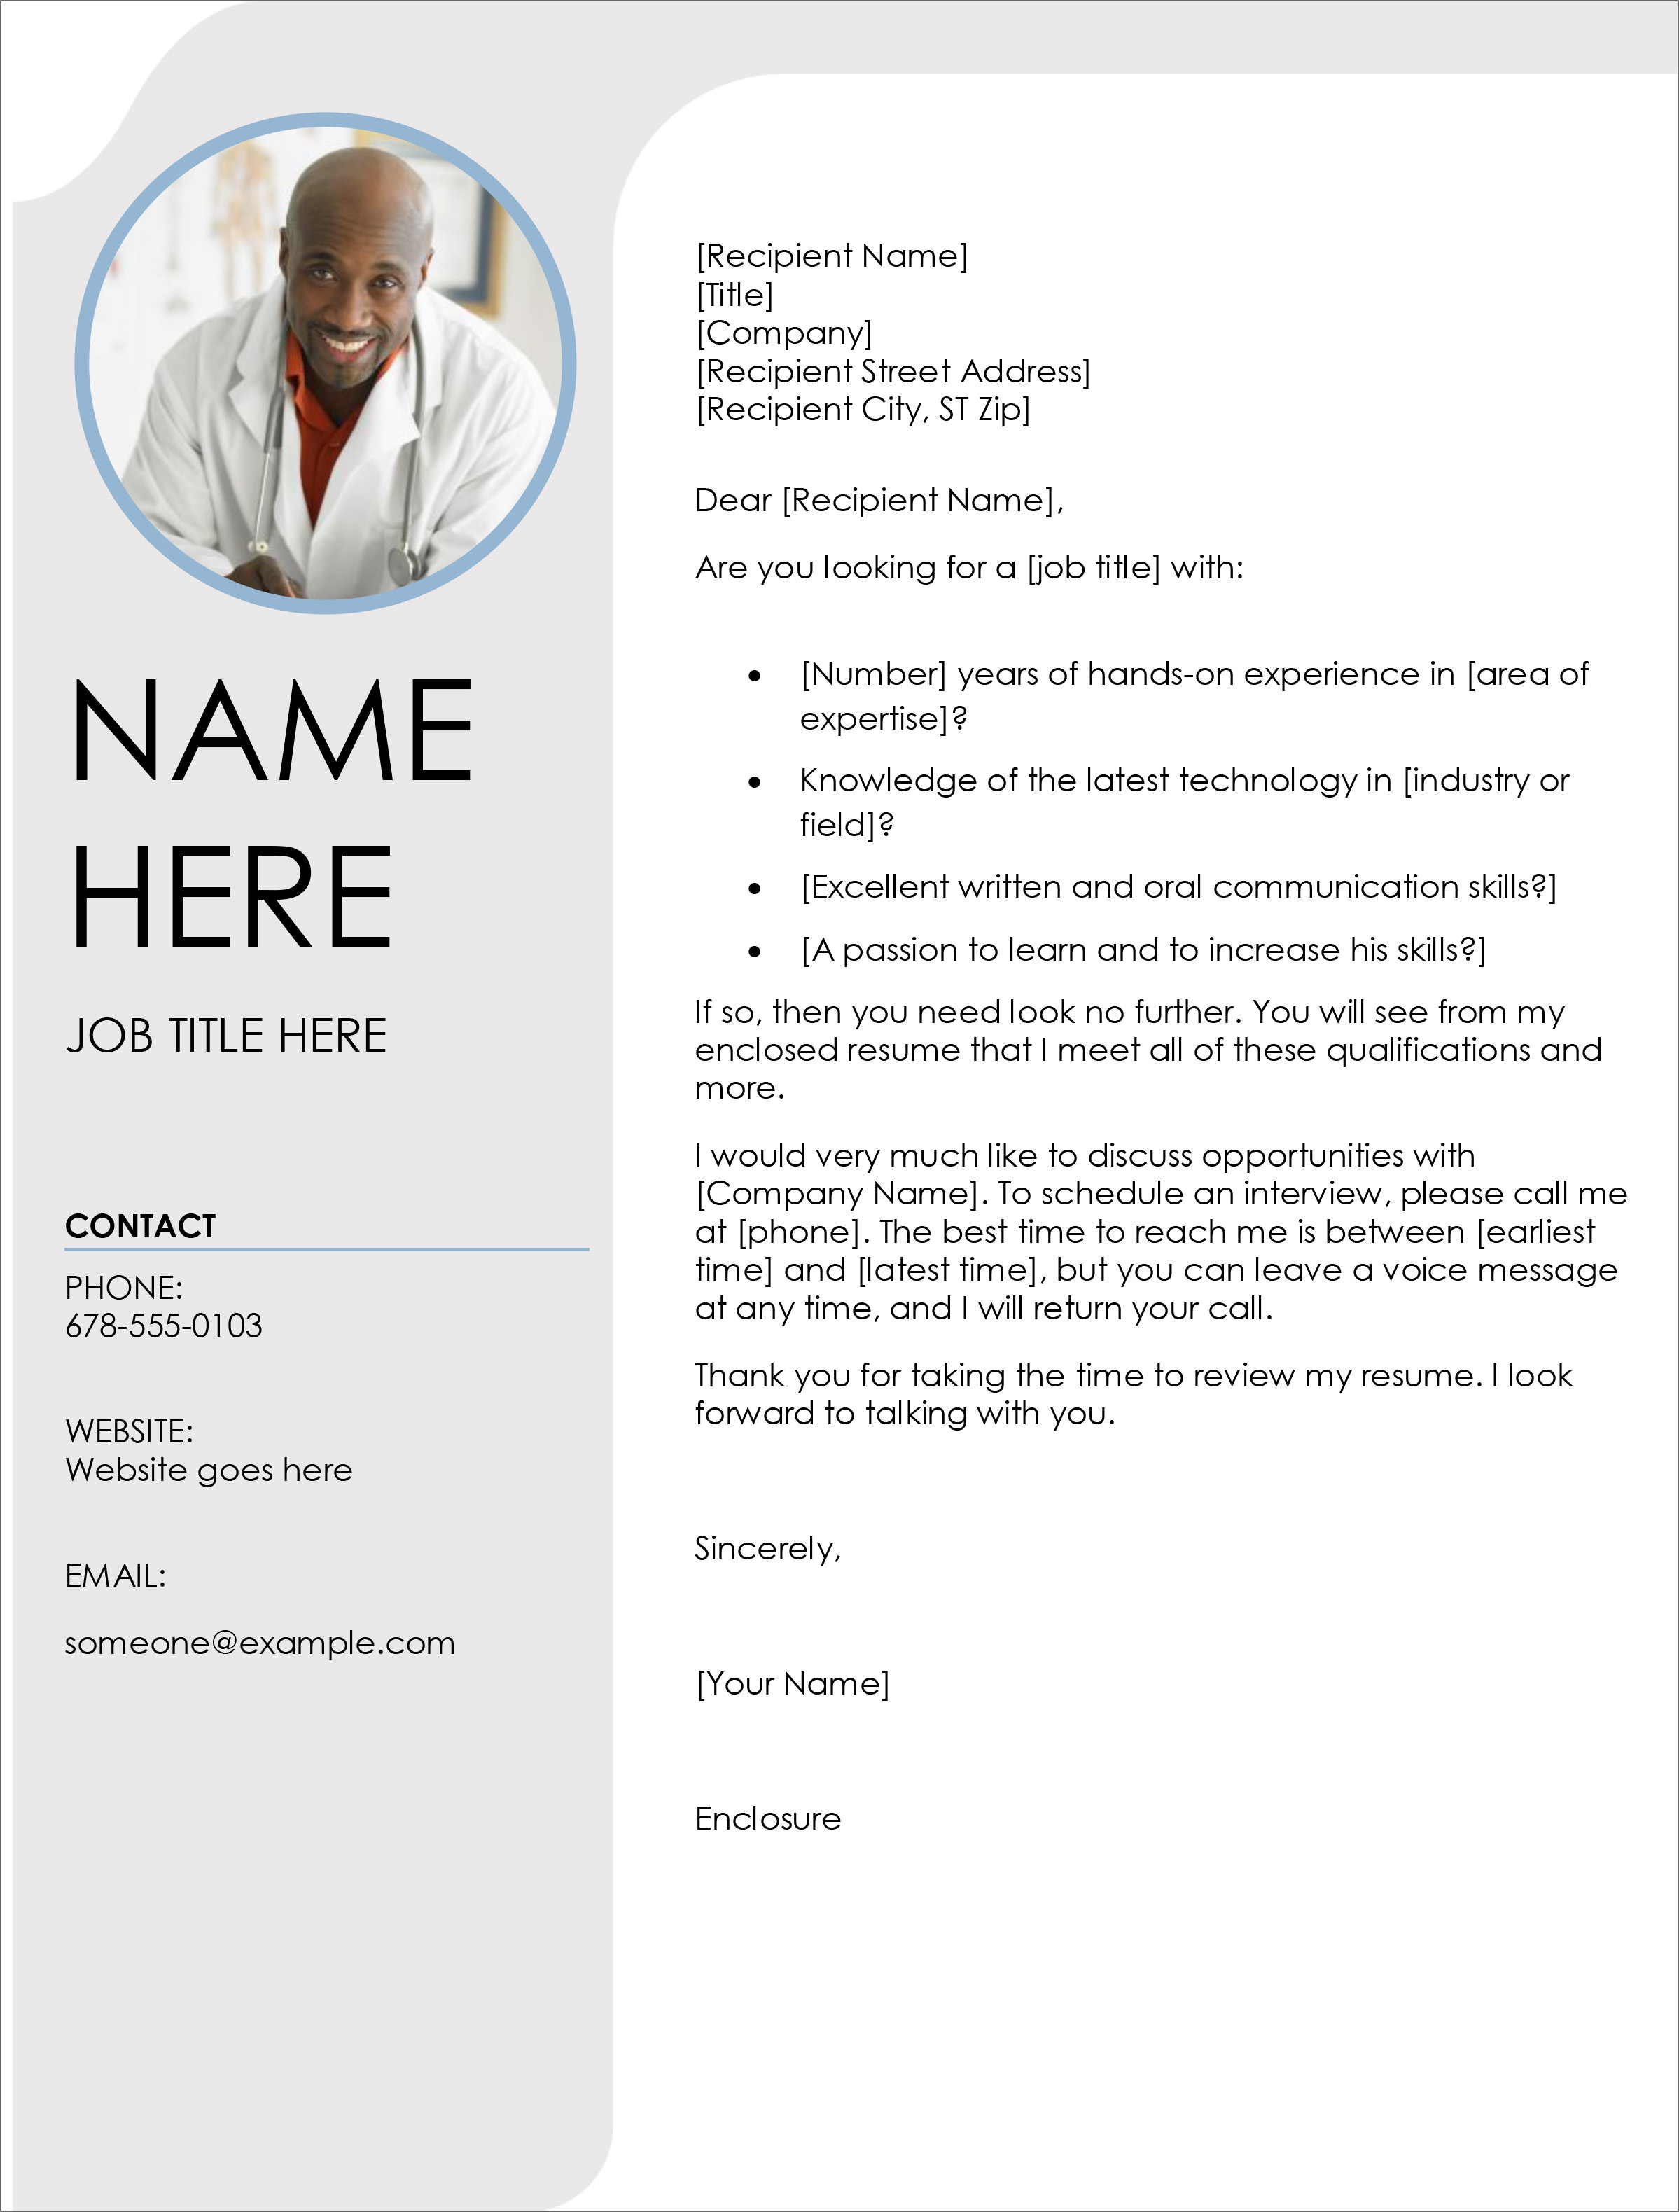 Free Word Cover Letter Template - FREE PRINTABLE TEMPLATES